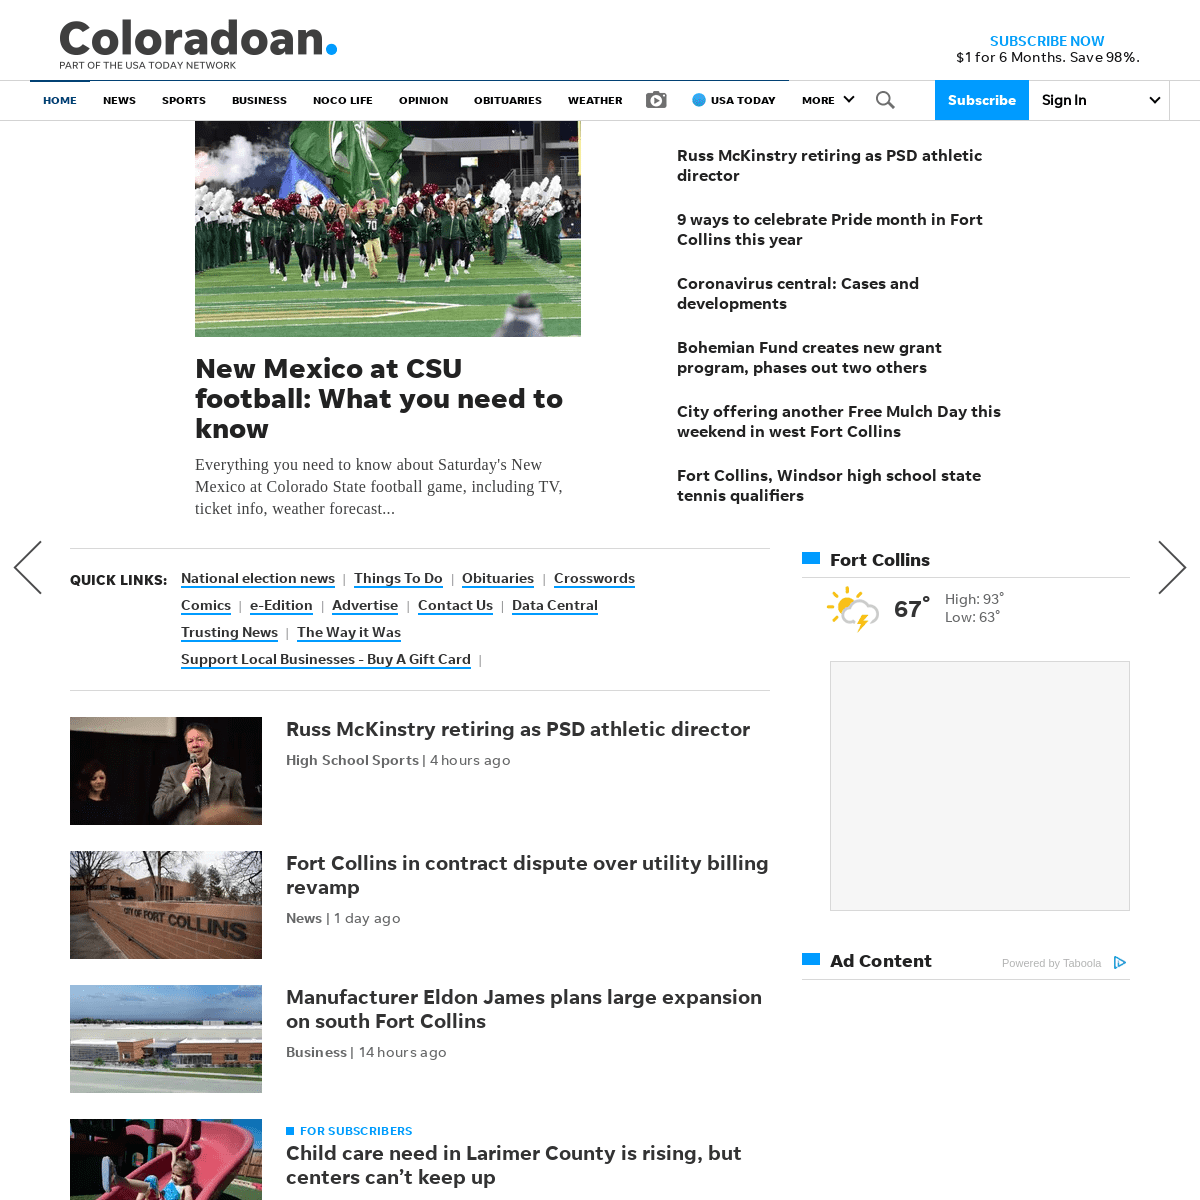 A complete backup of https://coloradoan.com